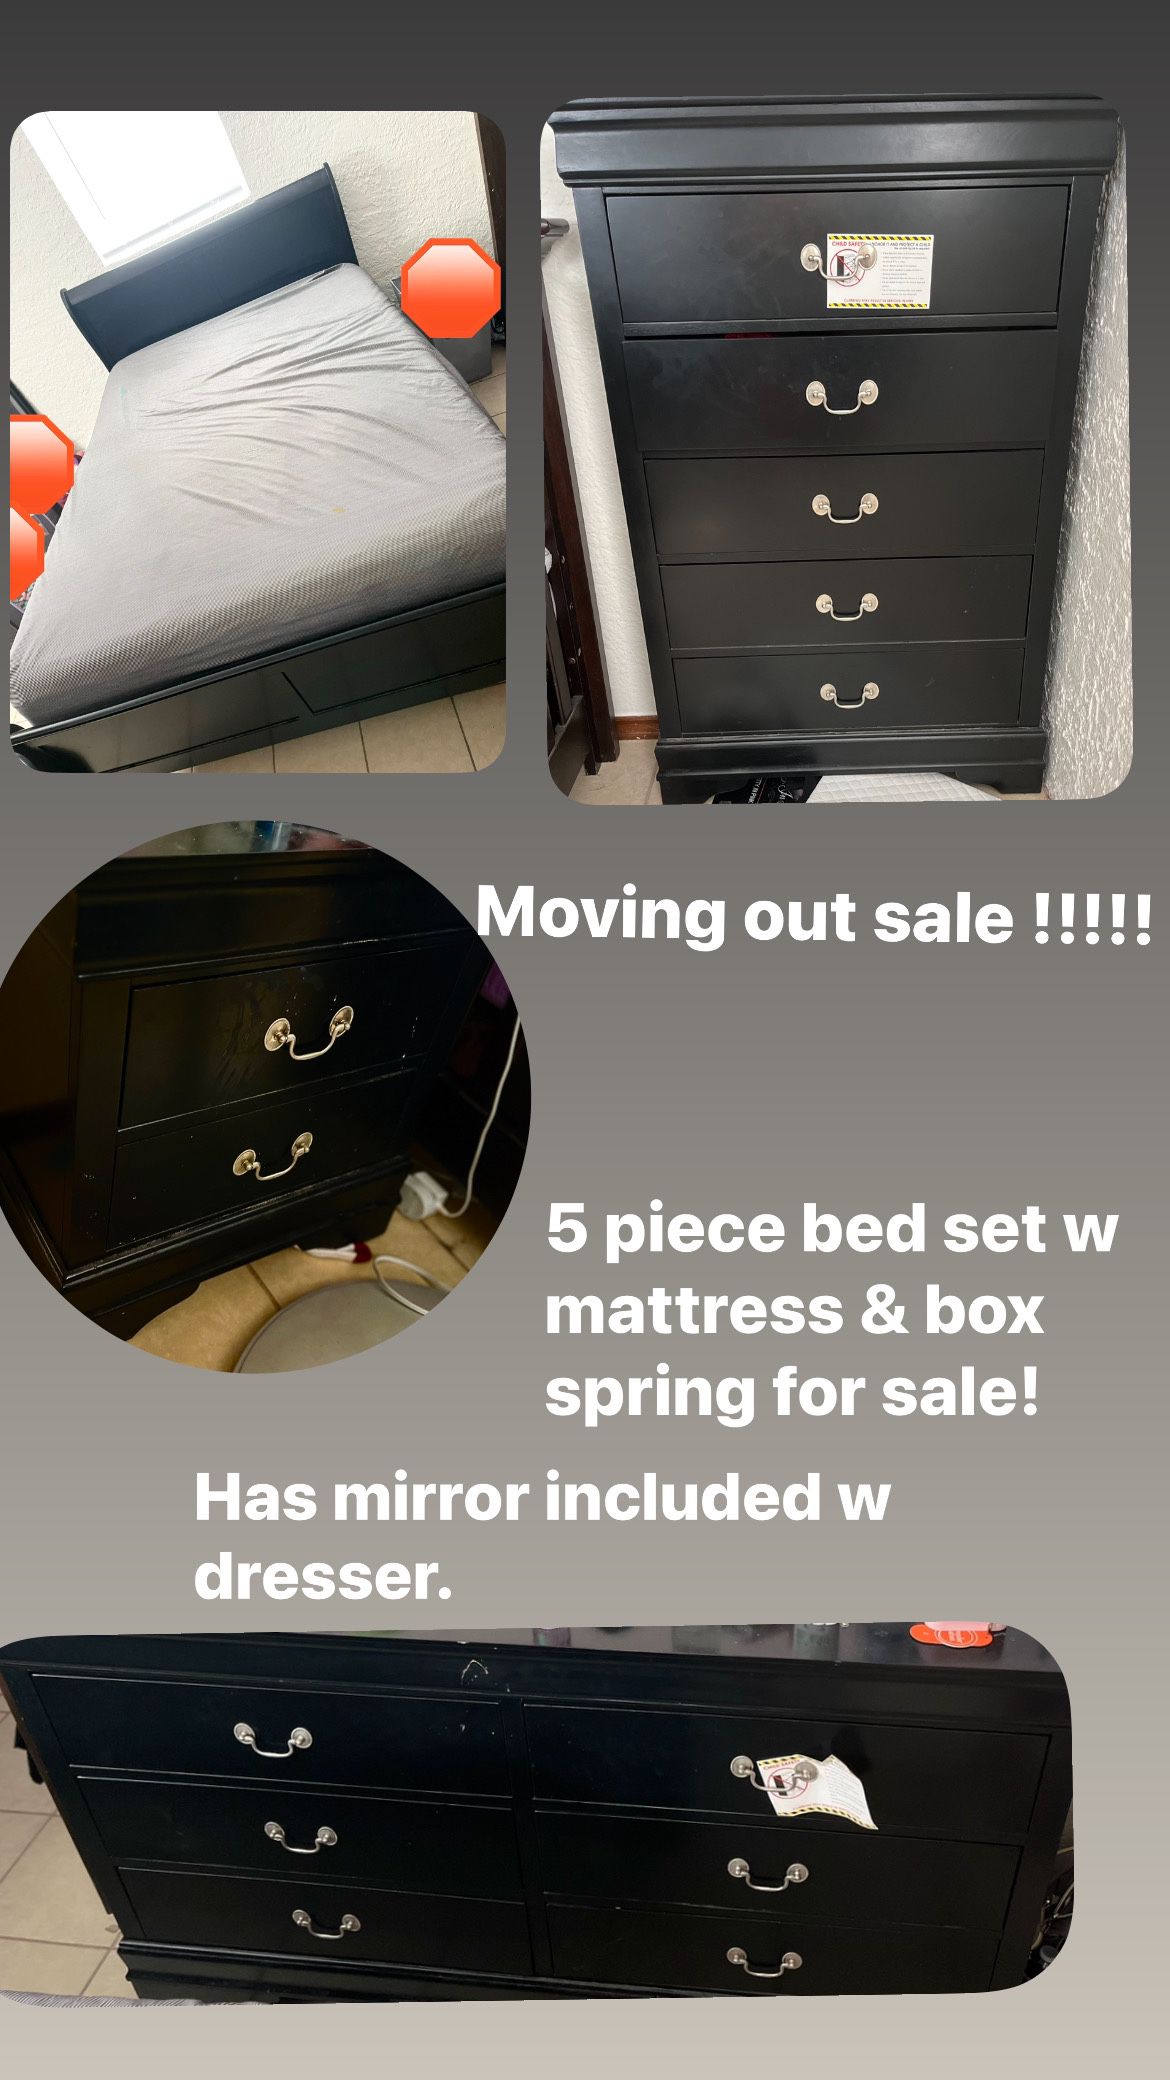 4 Piece Bedroom Set $300 W Mirror Mattress And Box Spring Included